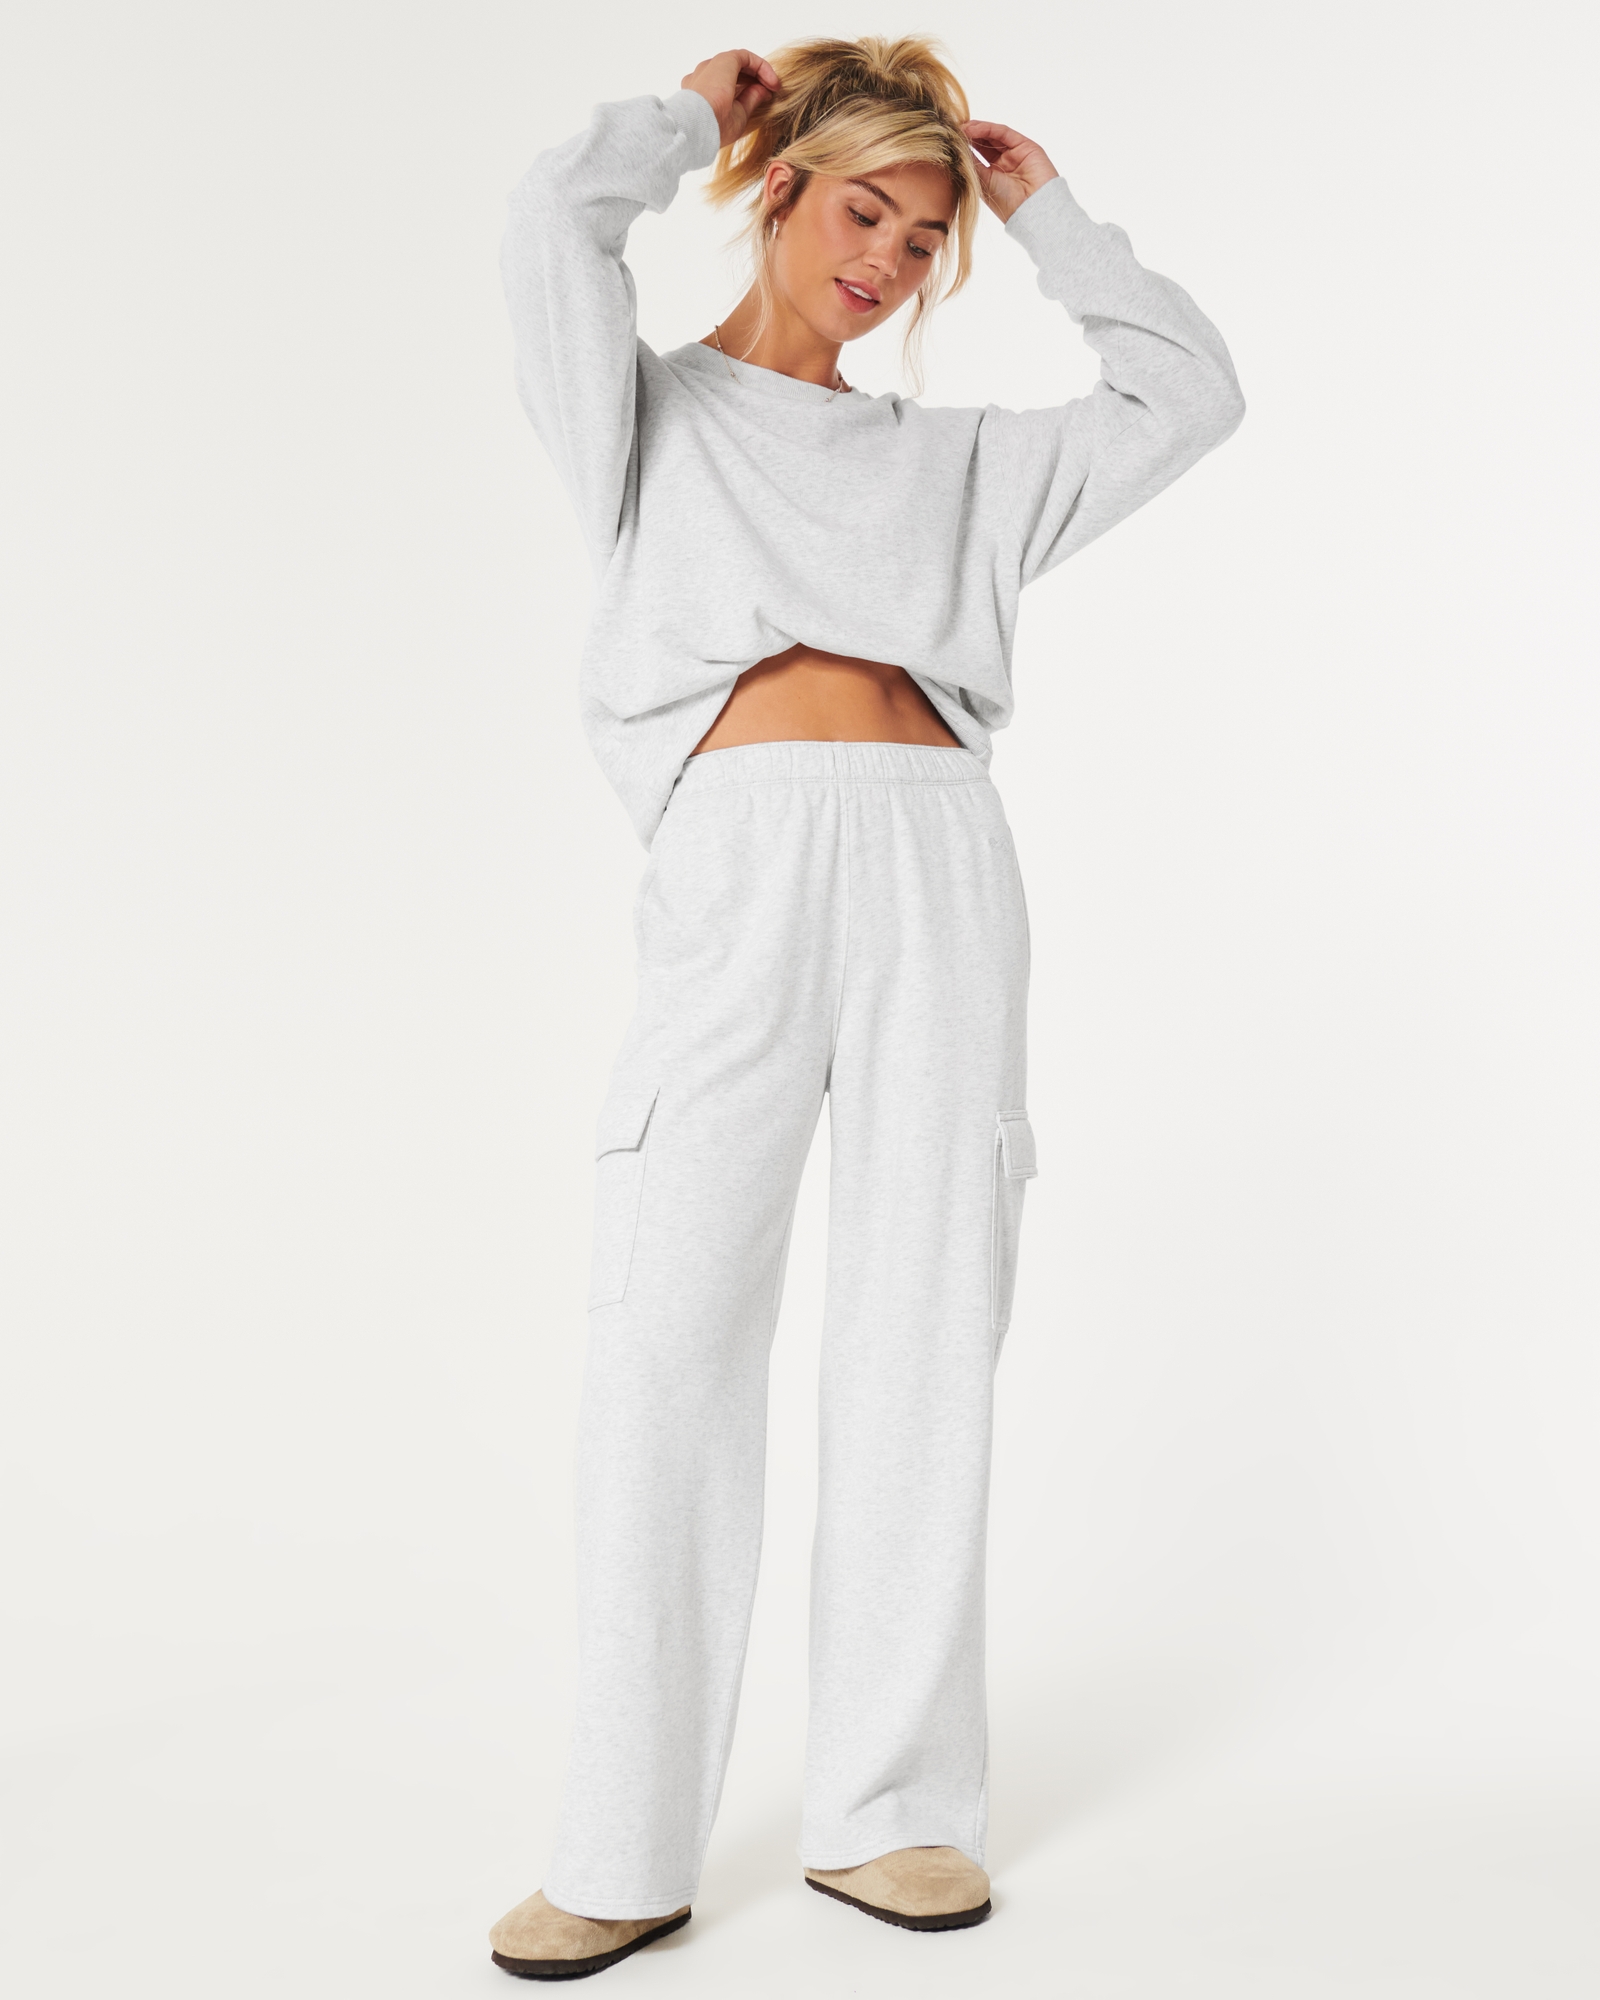 https://img.hollisterco.com/is/image/anf/KIC_347-3050-0915-112_model1.jpg?policy=product-extra-large